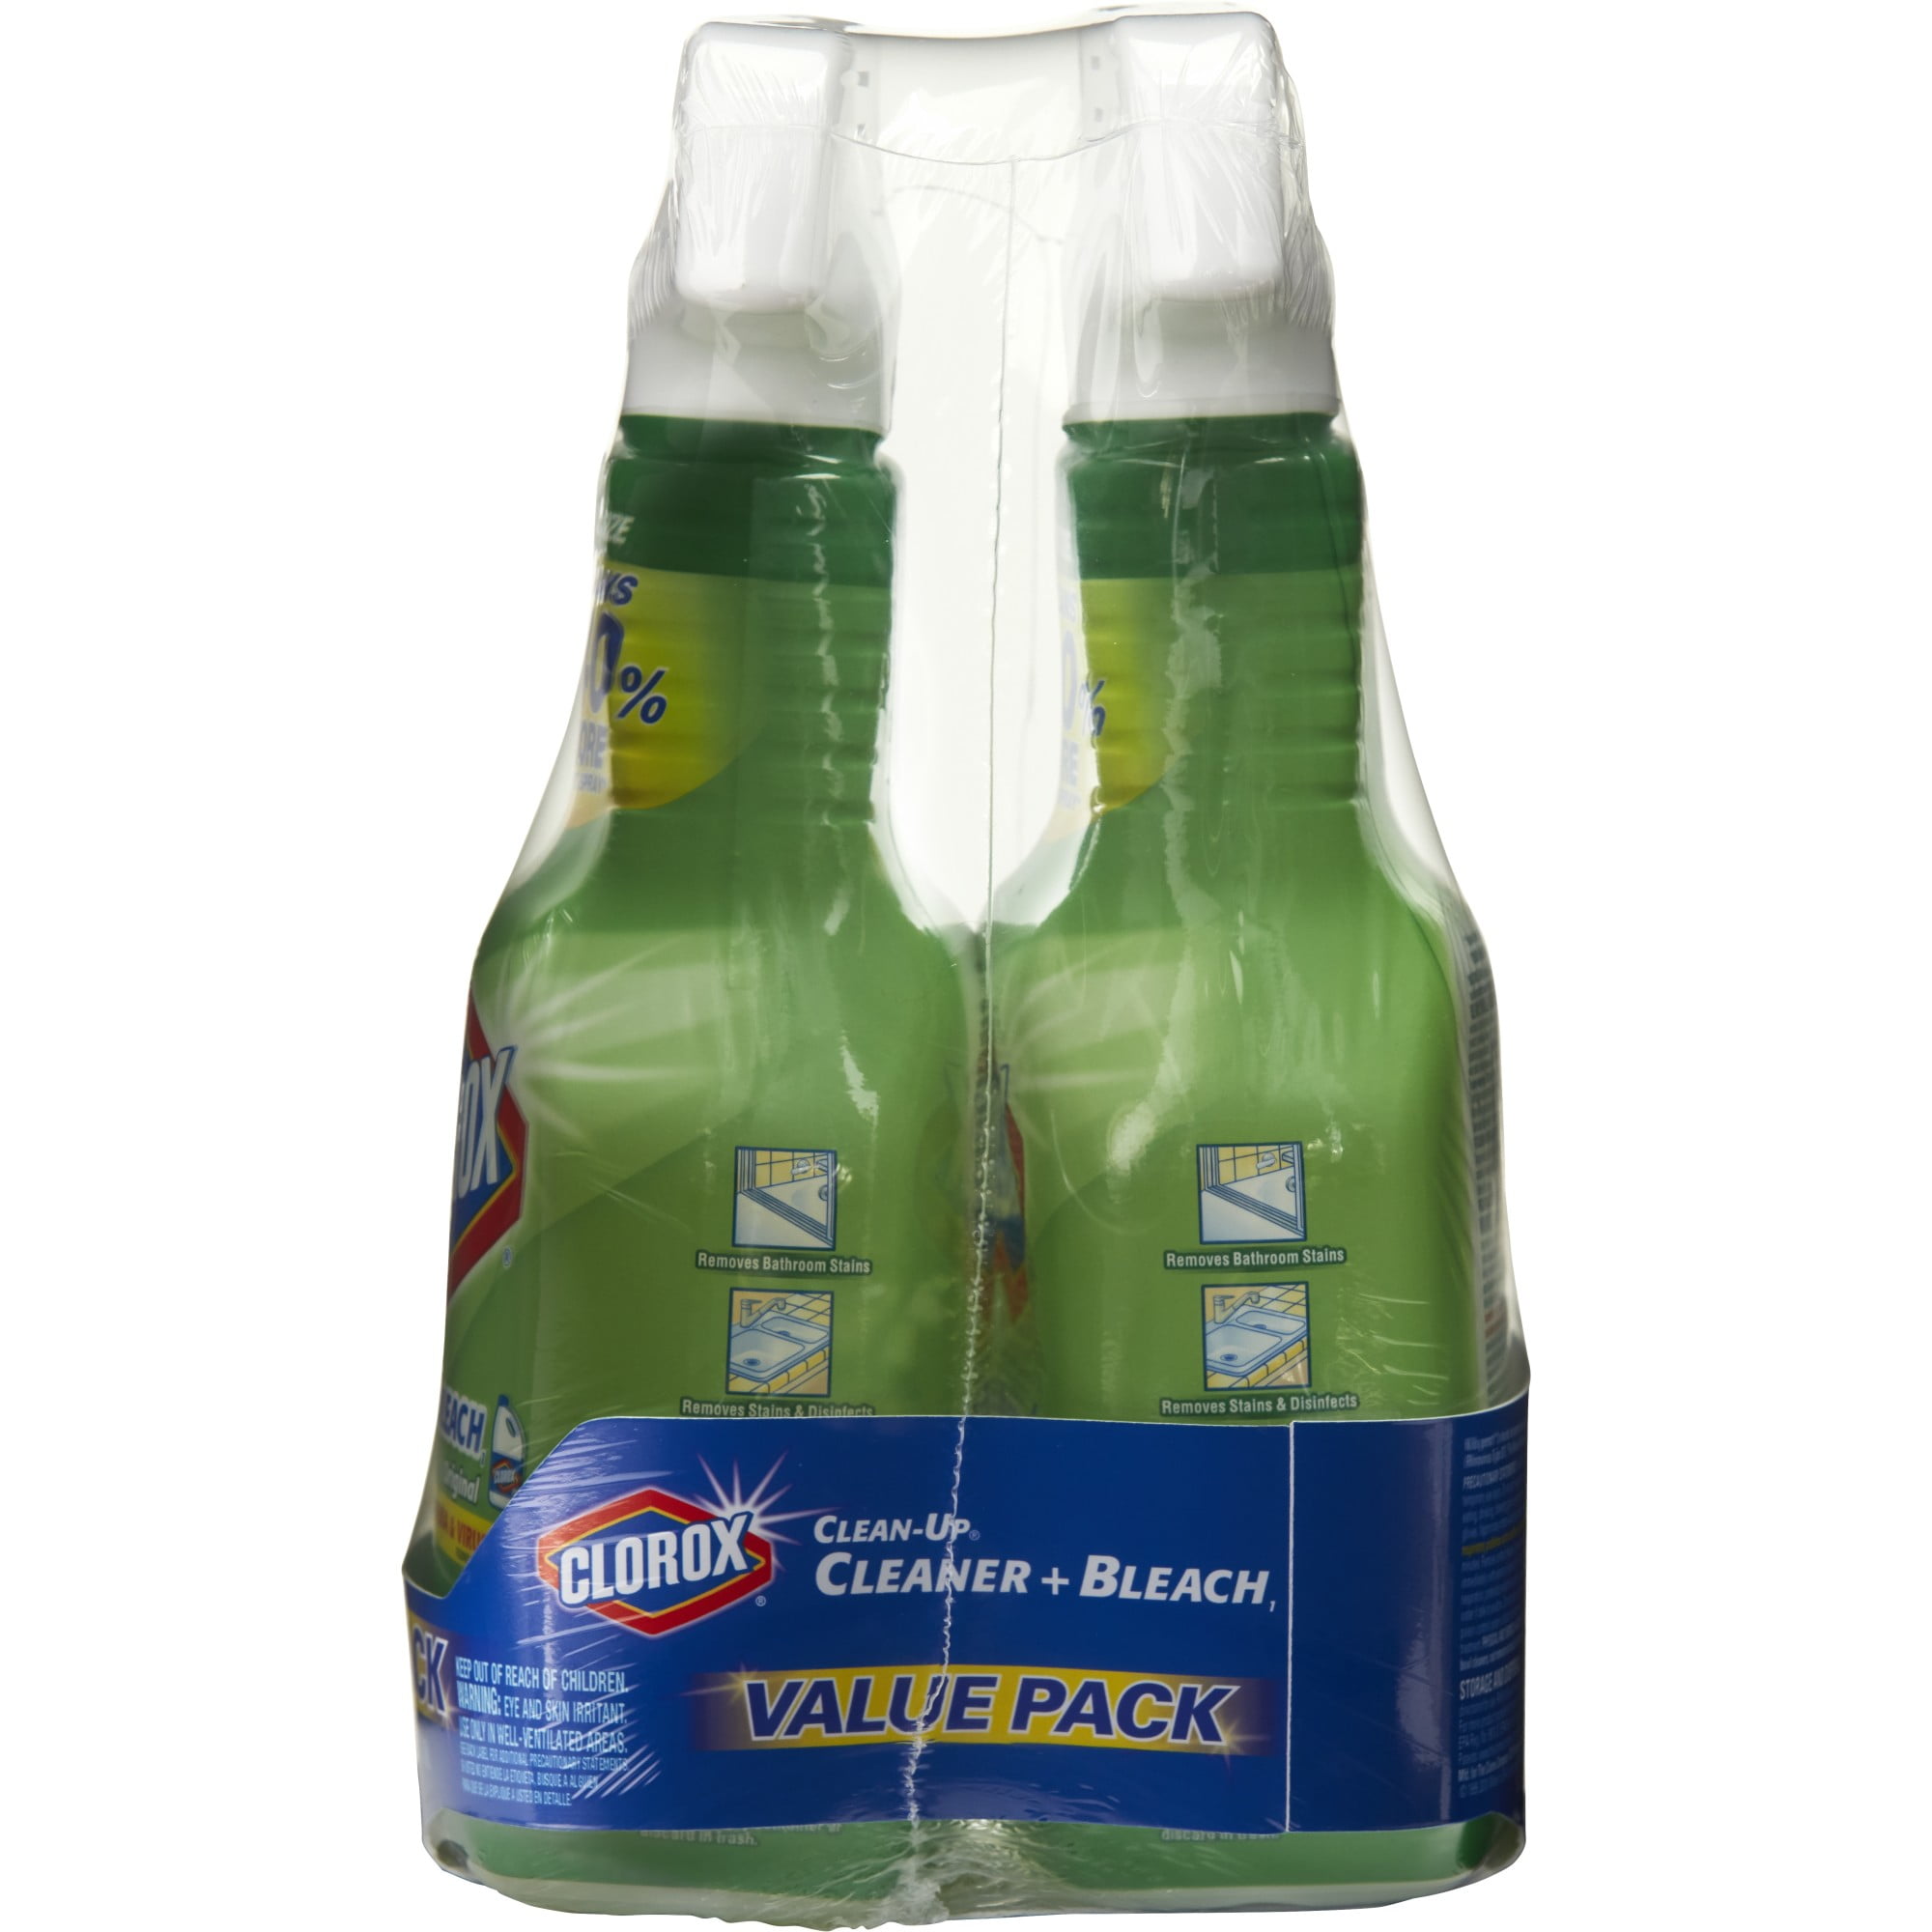 Clorox Clean-Up All Purpose Cleaner with Bleach Spray Bottle, Original, 32 Ounces - 2 Pack, Size: 64 oz